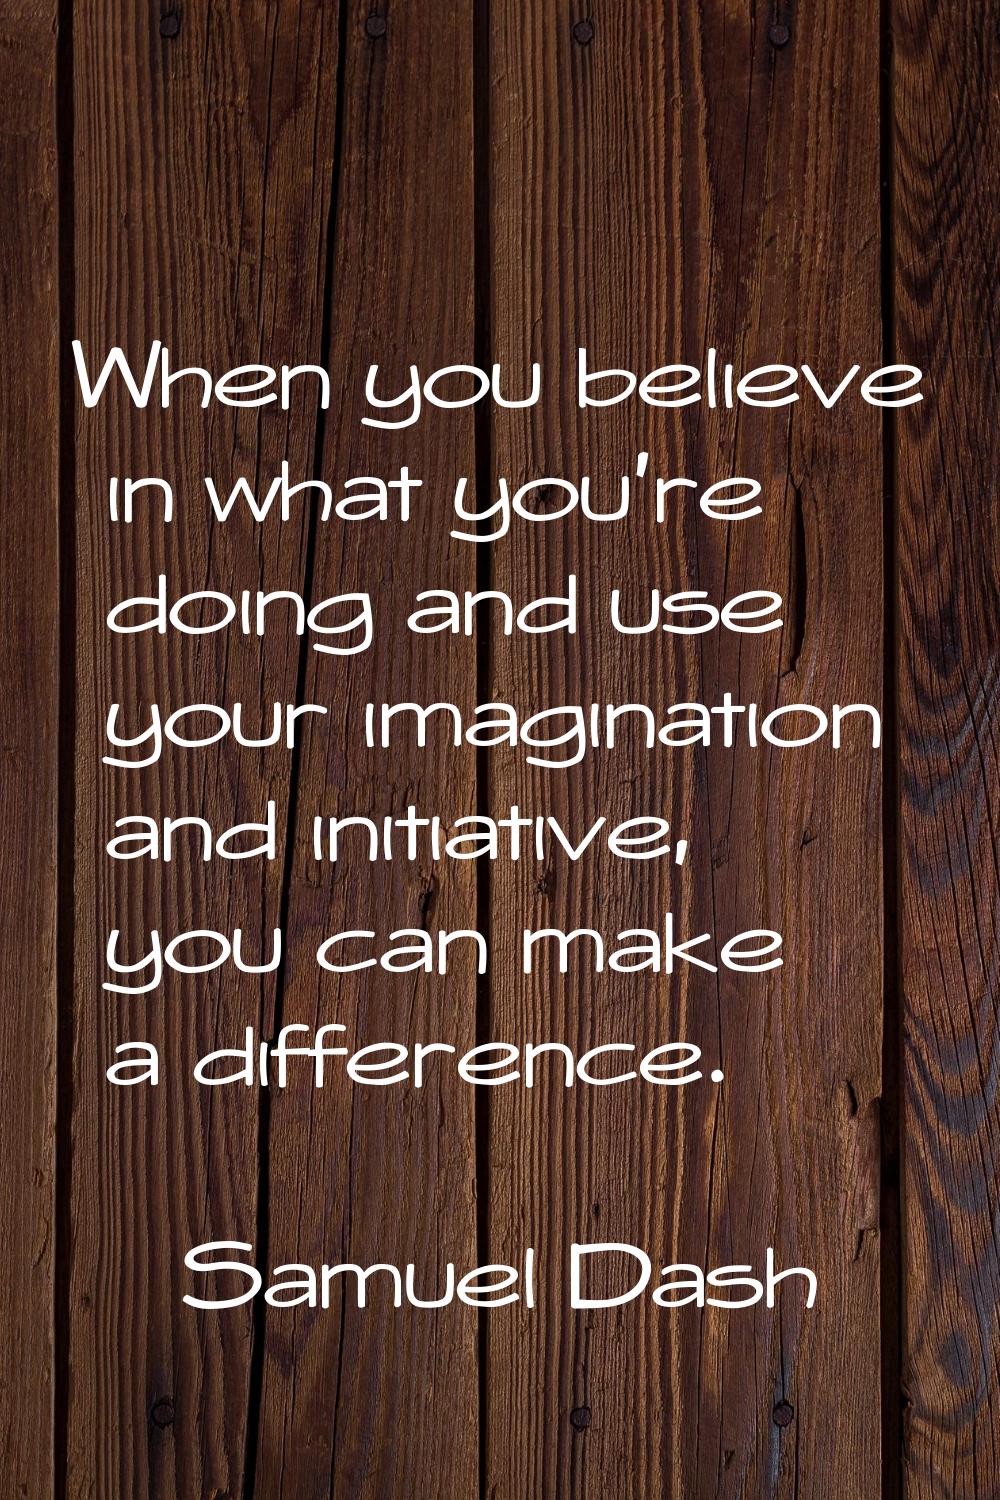 When you believe in what you're doing and use your imagination and initiative, you can make a diffe